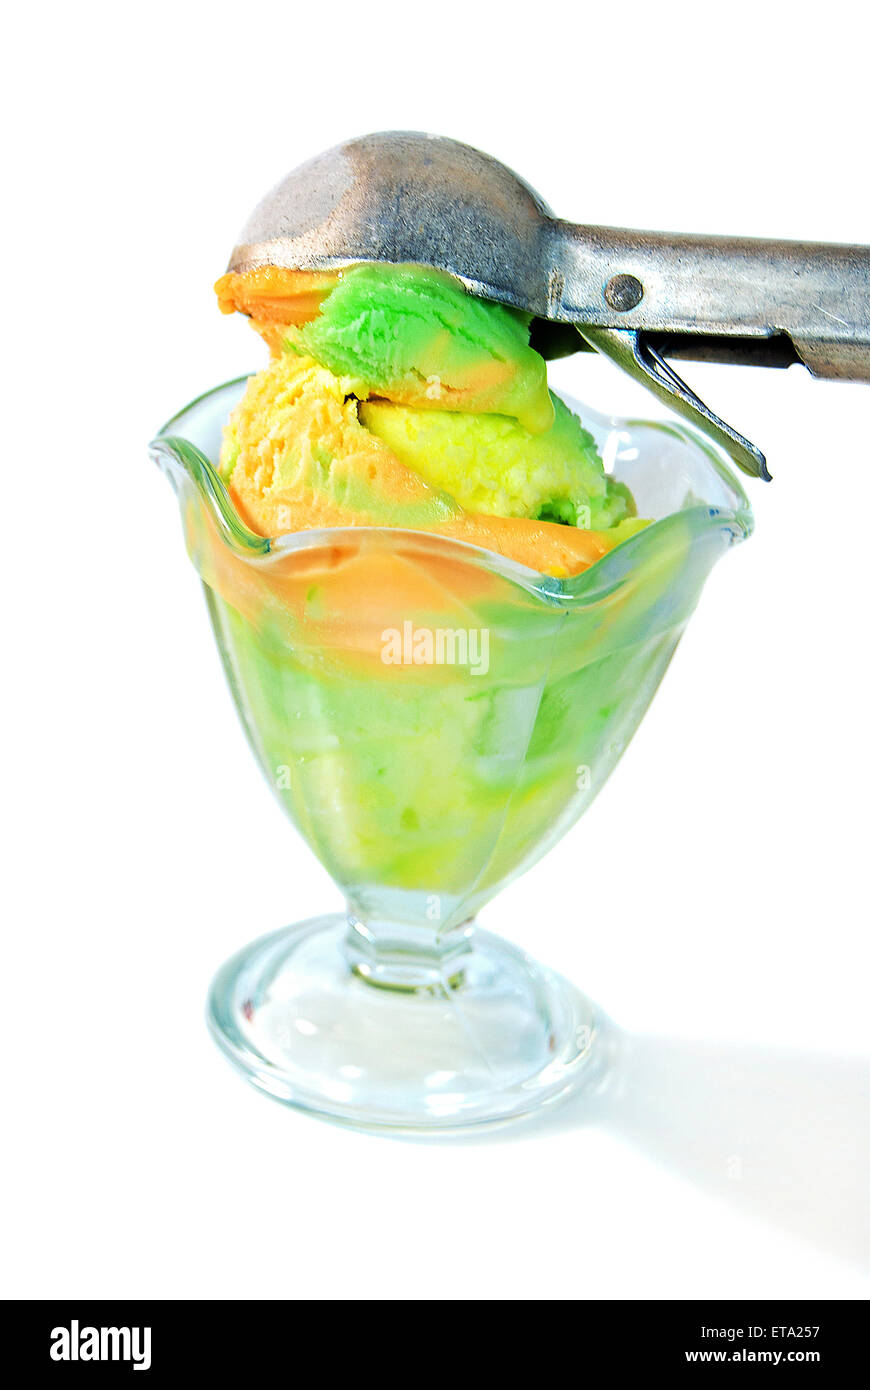 Colorful sherbet in sundae glass with old ice cream scoop isolated on white background. Stock Photo